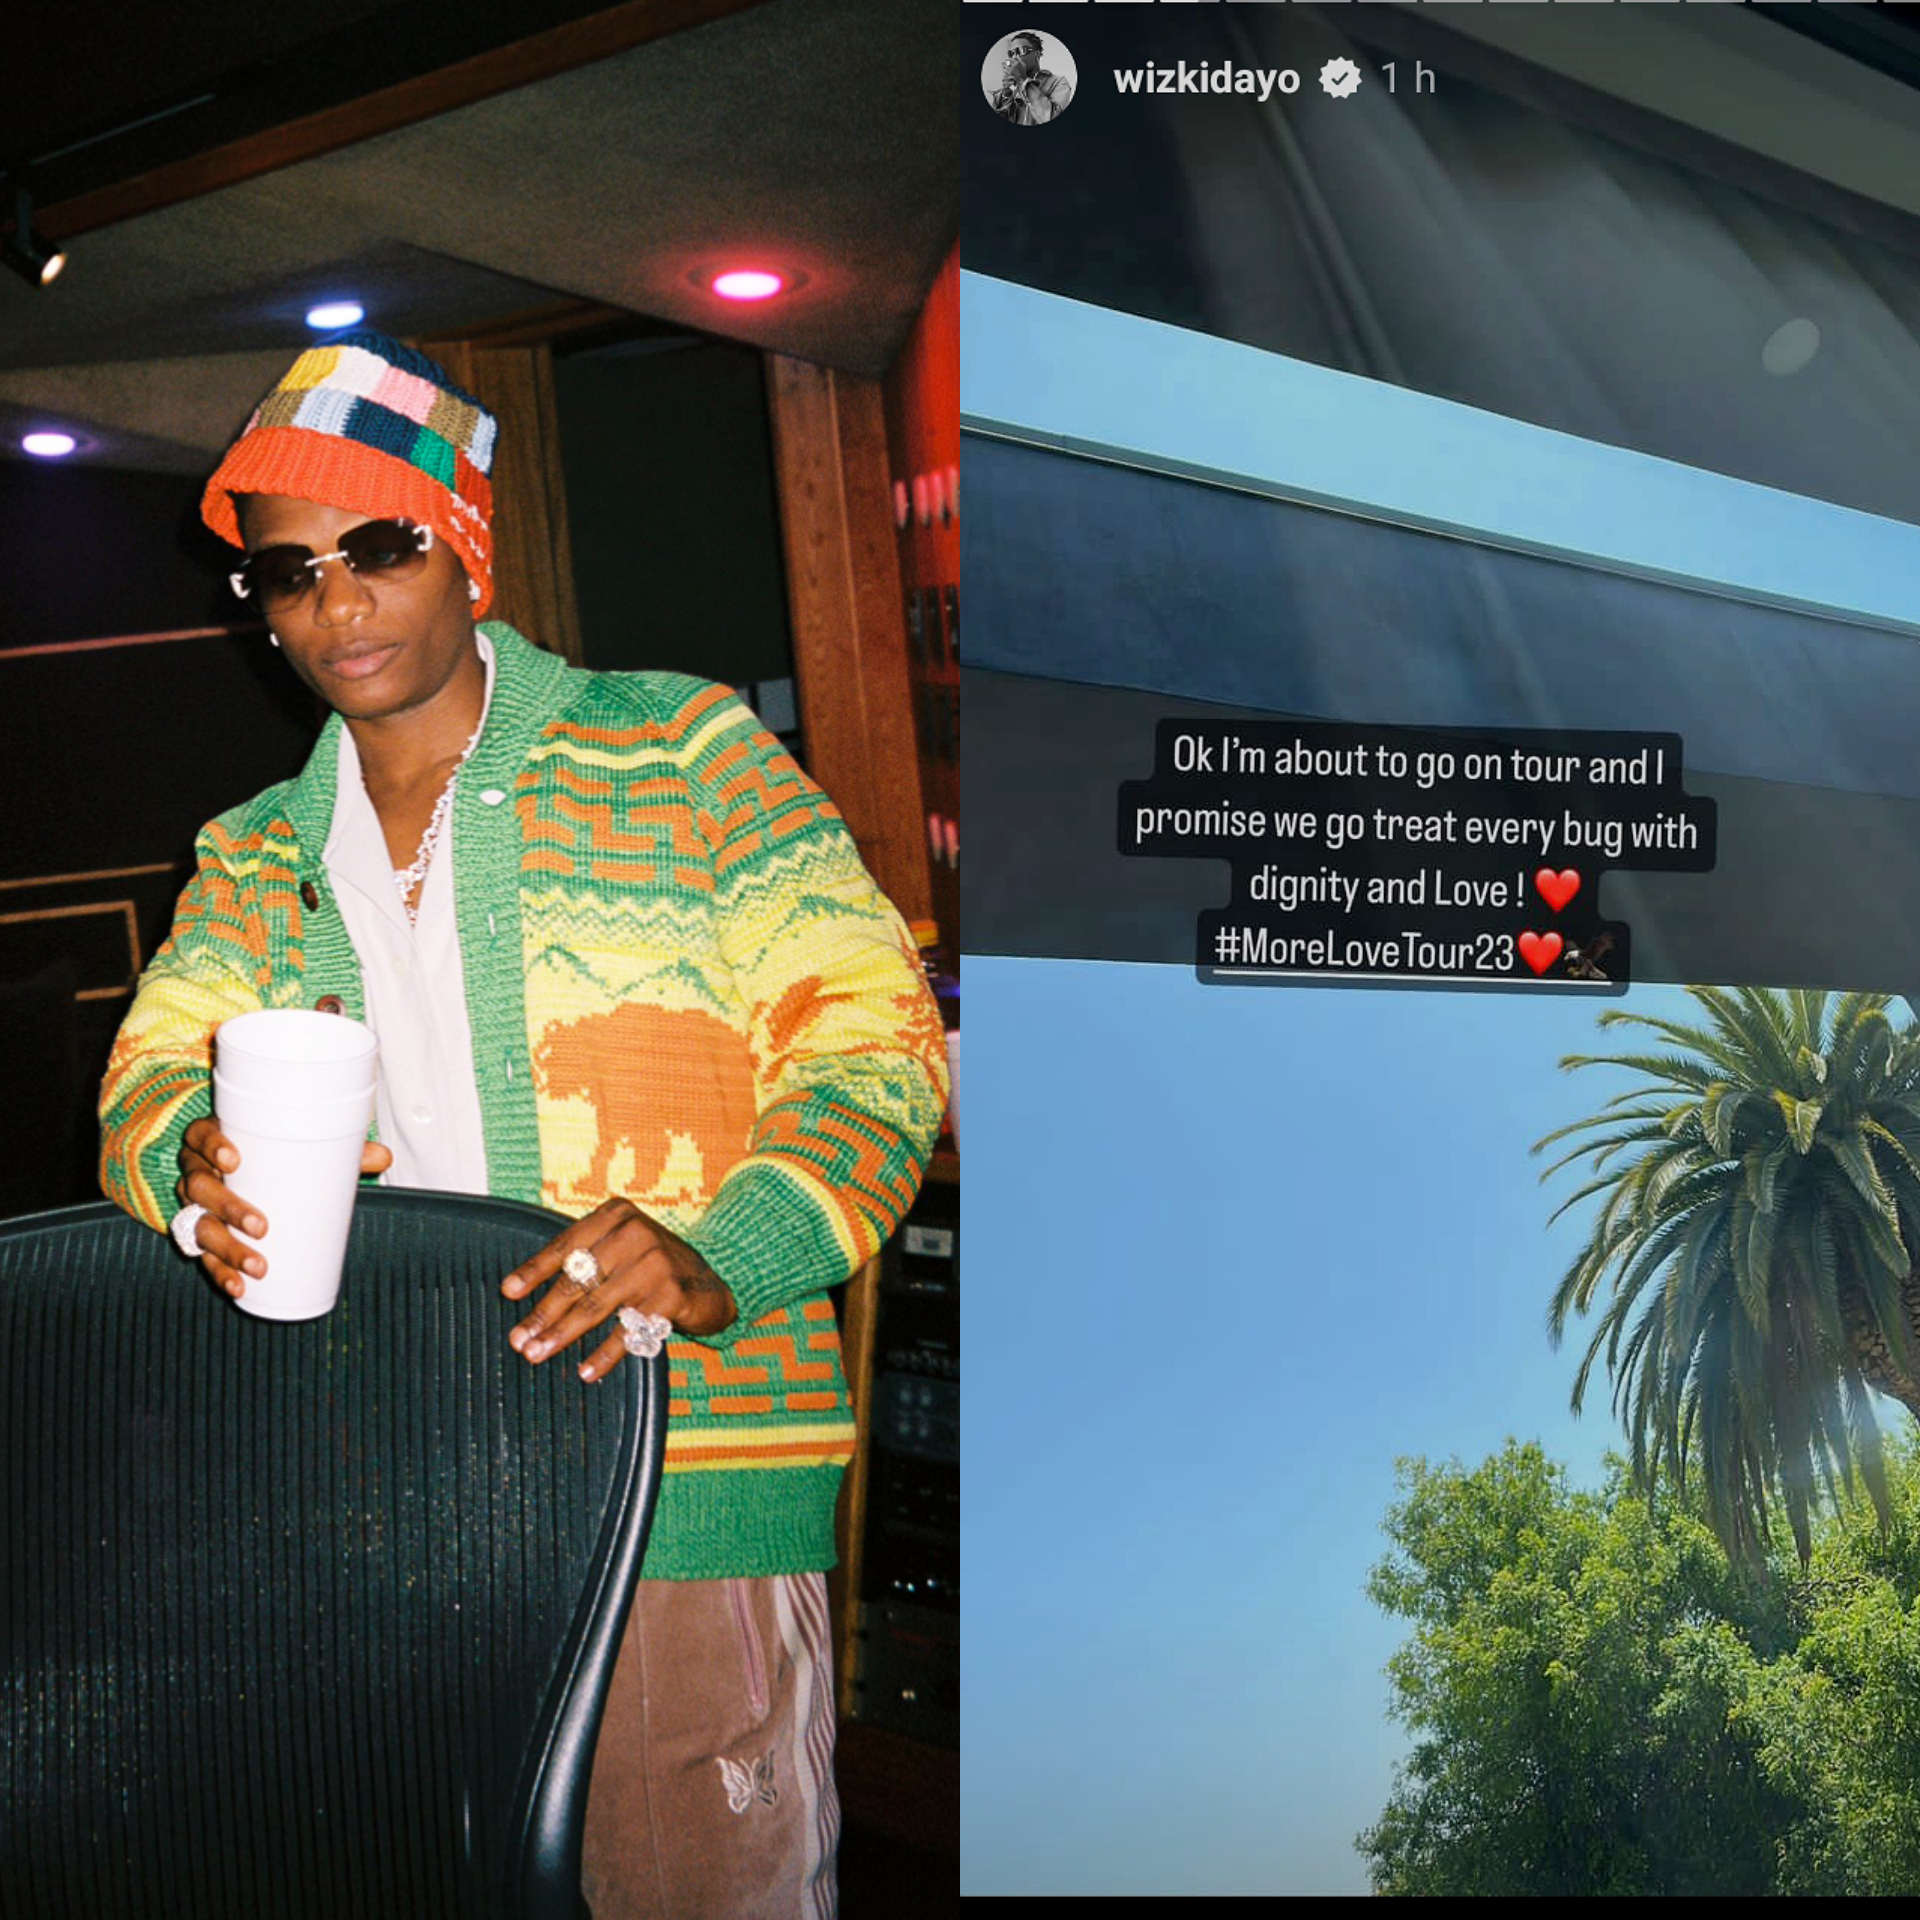 Wizkid promises to treat bugs with dignity